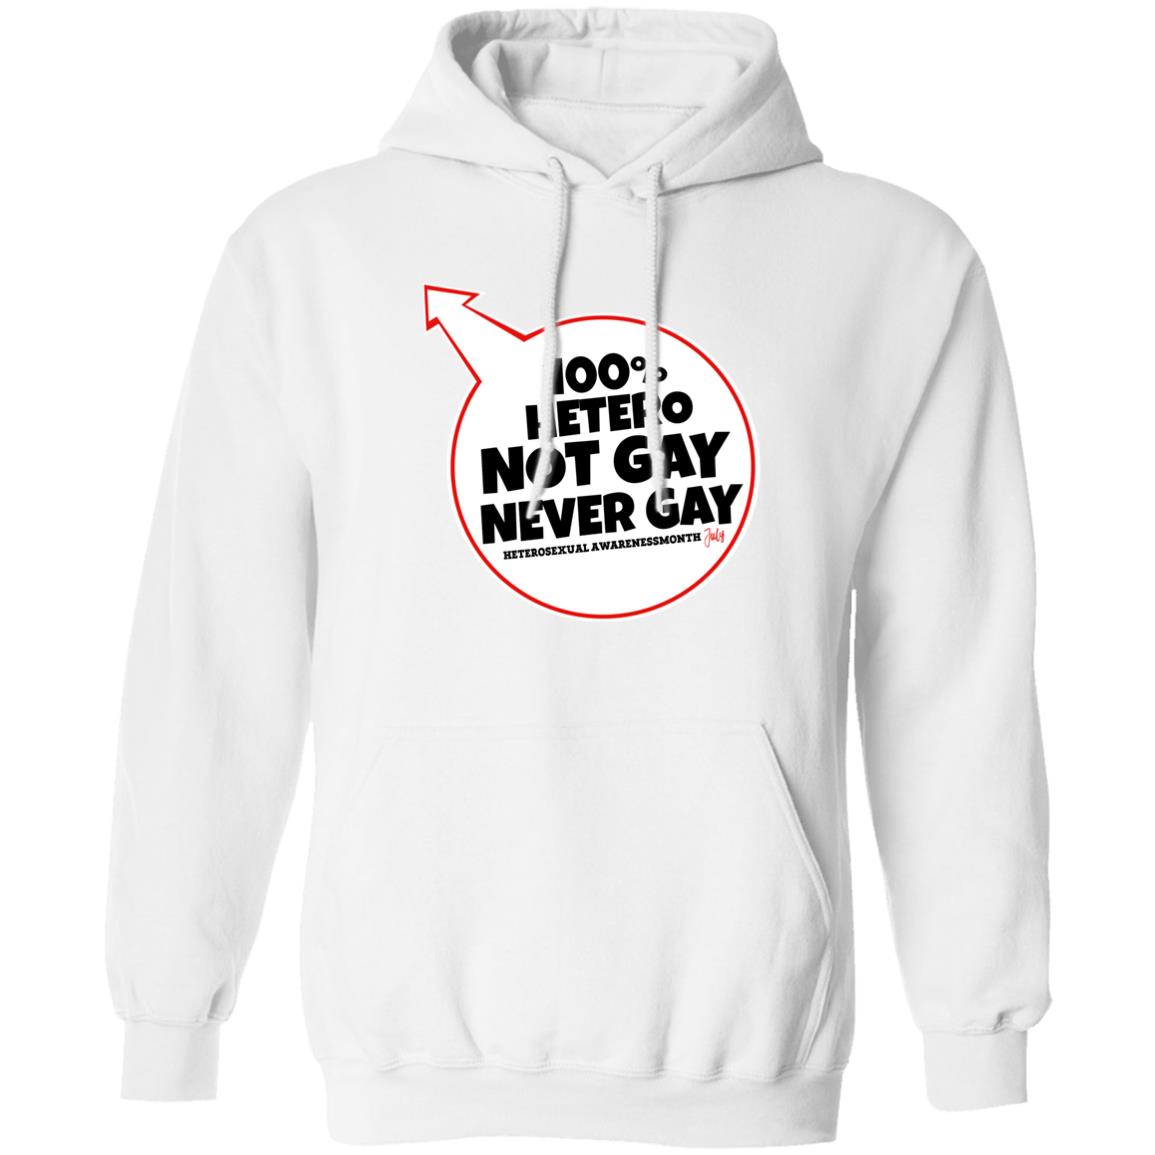 100% Hetero Not Gay Never Gay Shirt Panetory – Graphic Design Apparel &Amp; Accessories Online